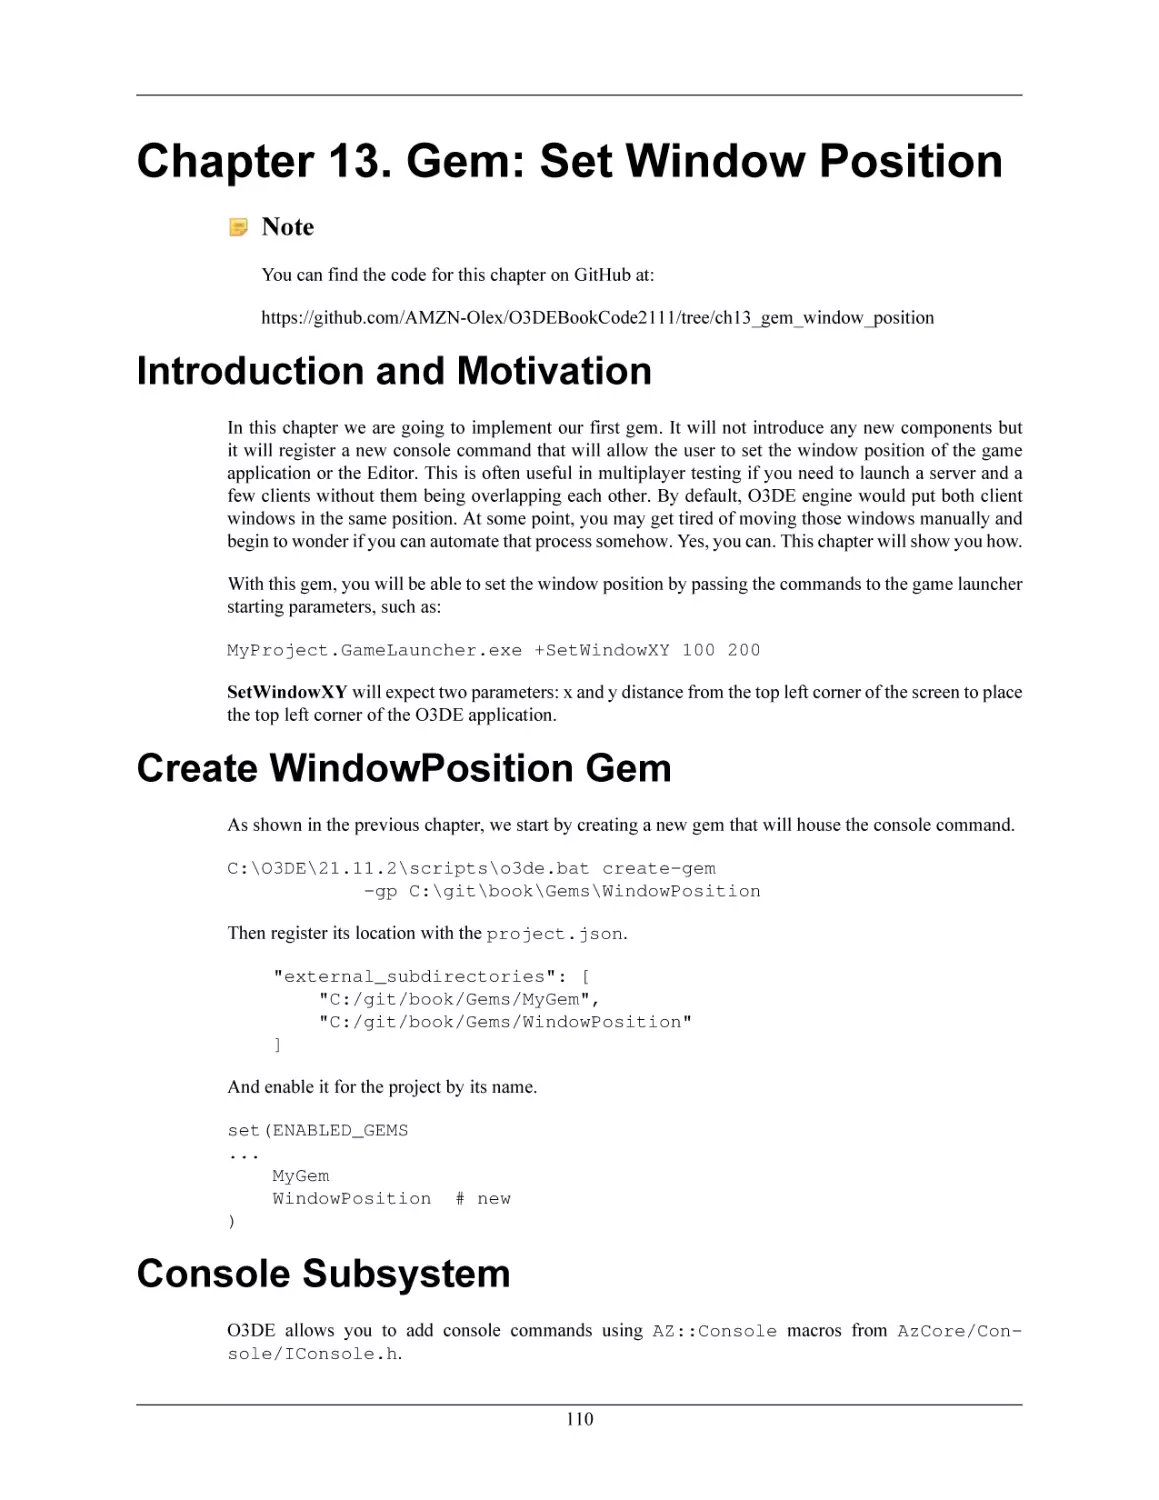 Chapter 13. Gem
Introduction and Motivation
Create WindowPosition Gem
Console Subsystem